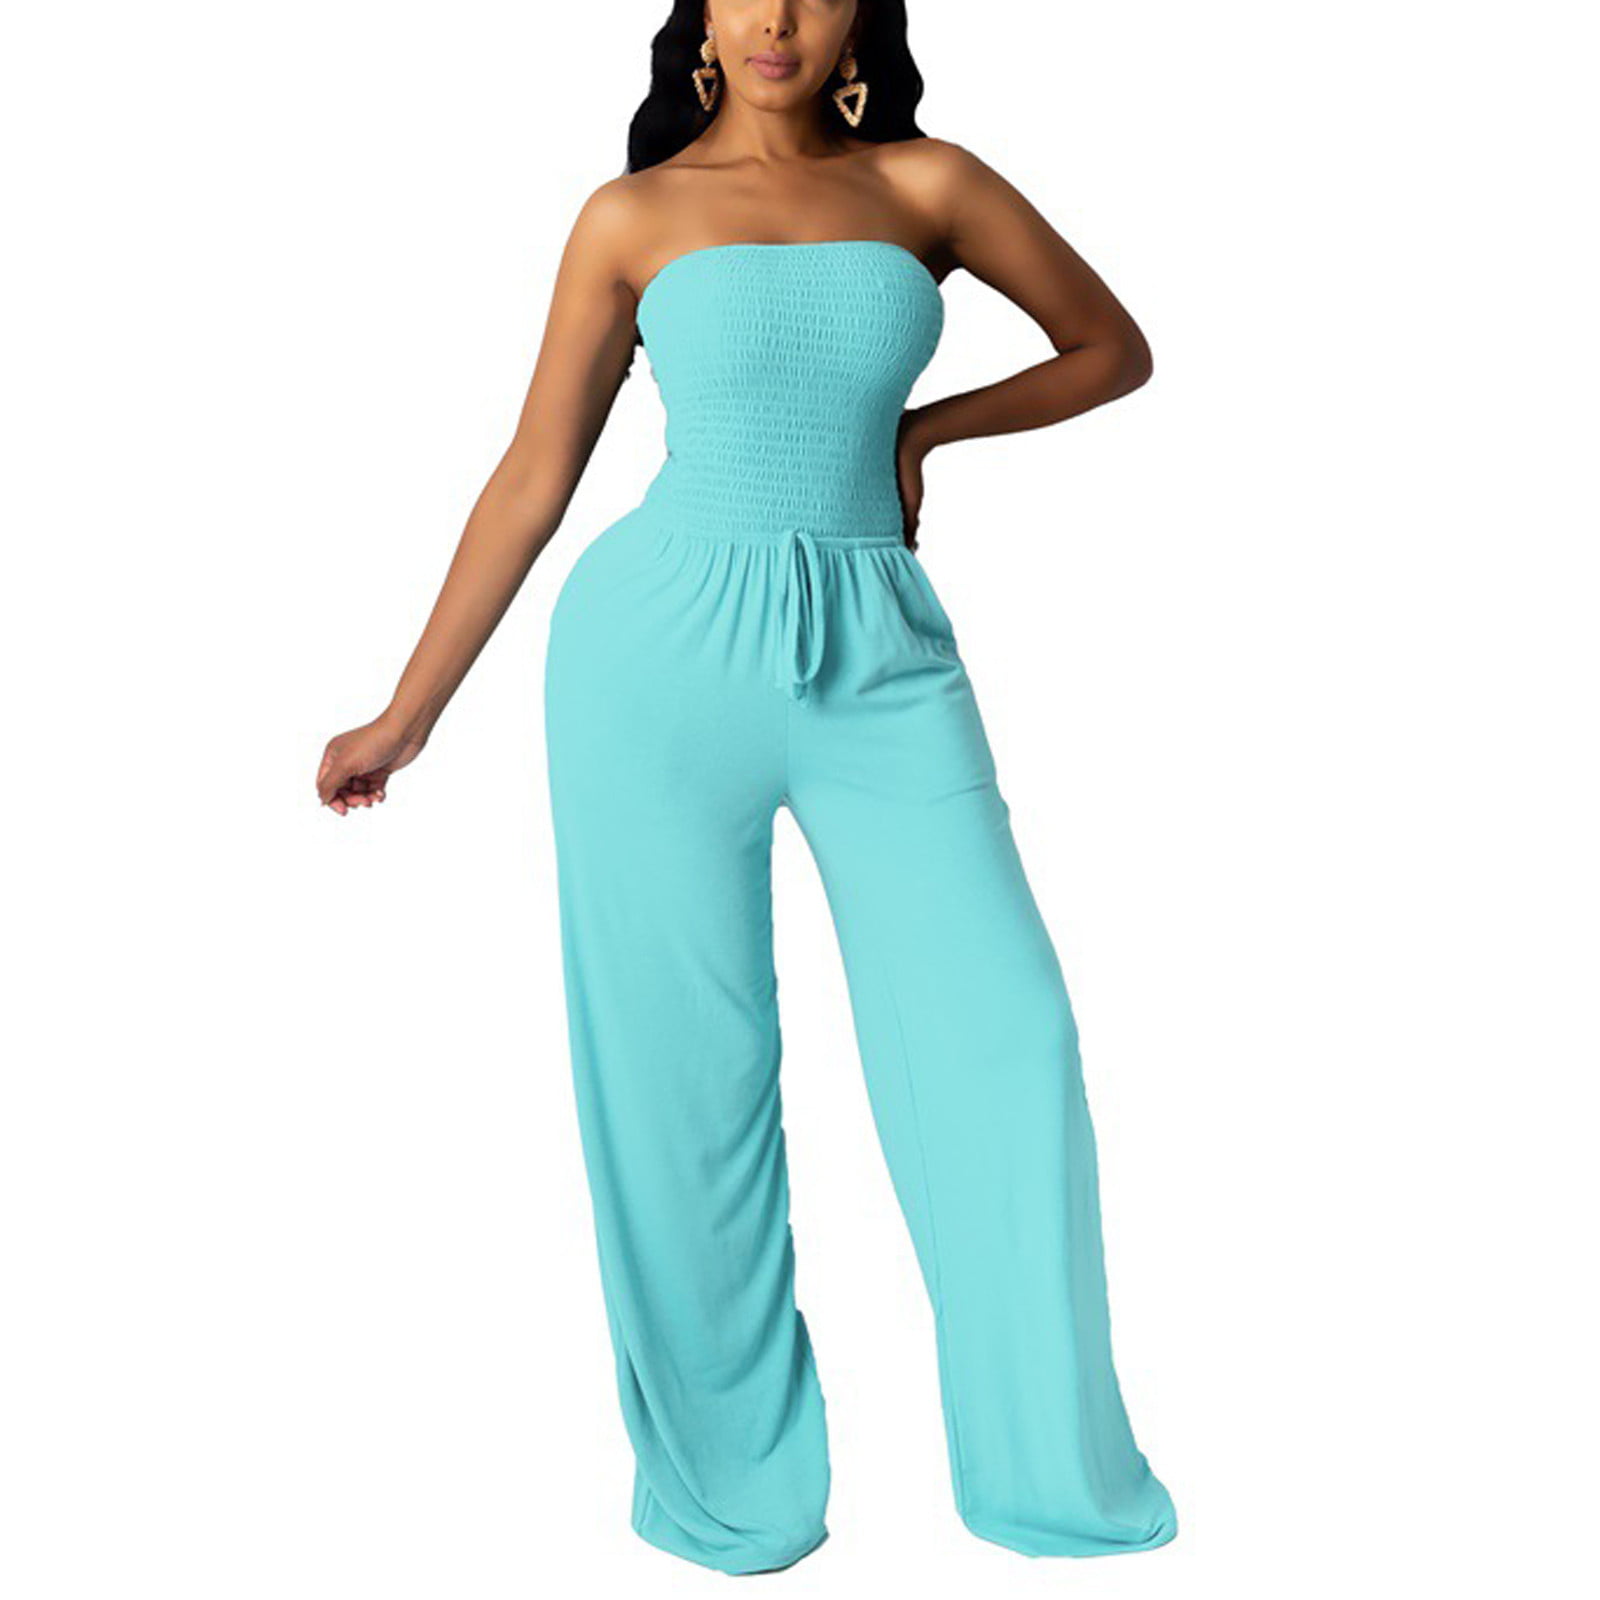 VENUS - Slits up the legs makes this effortless striped jumpsuit feel extra  breezy. Smocked Strapless Jumpsuit: http://bit.ly/2vmqSEa Shop Weekend  Retreat: http://bit.ly/32xNZaR~ | Facebook